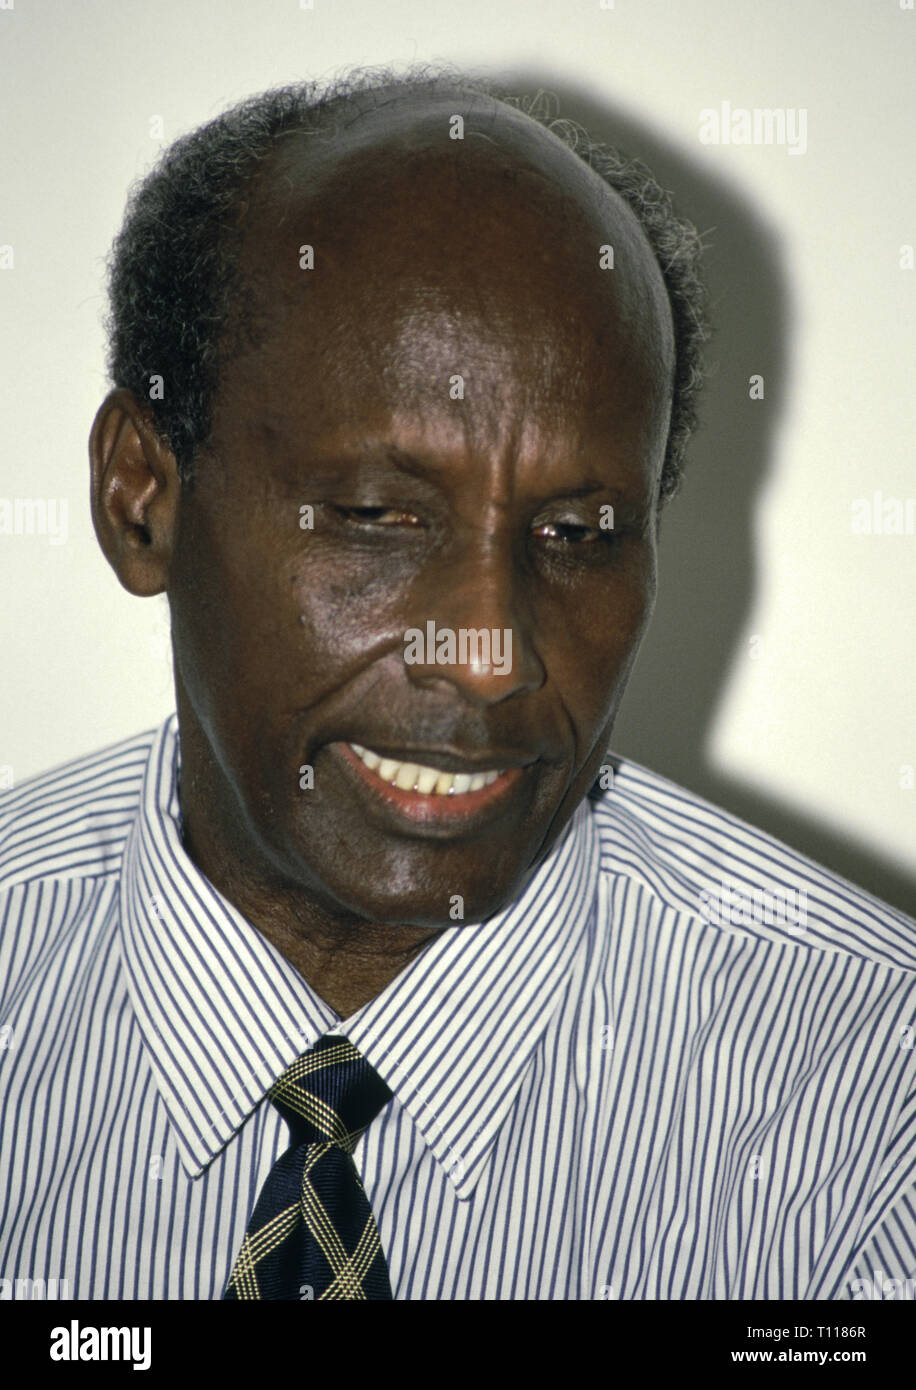 27th October 1993 General Mohamed Farah Aidid giving an impromptu press conference to the international media in Mogadishu, Somalia. Stock Photo